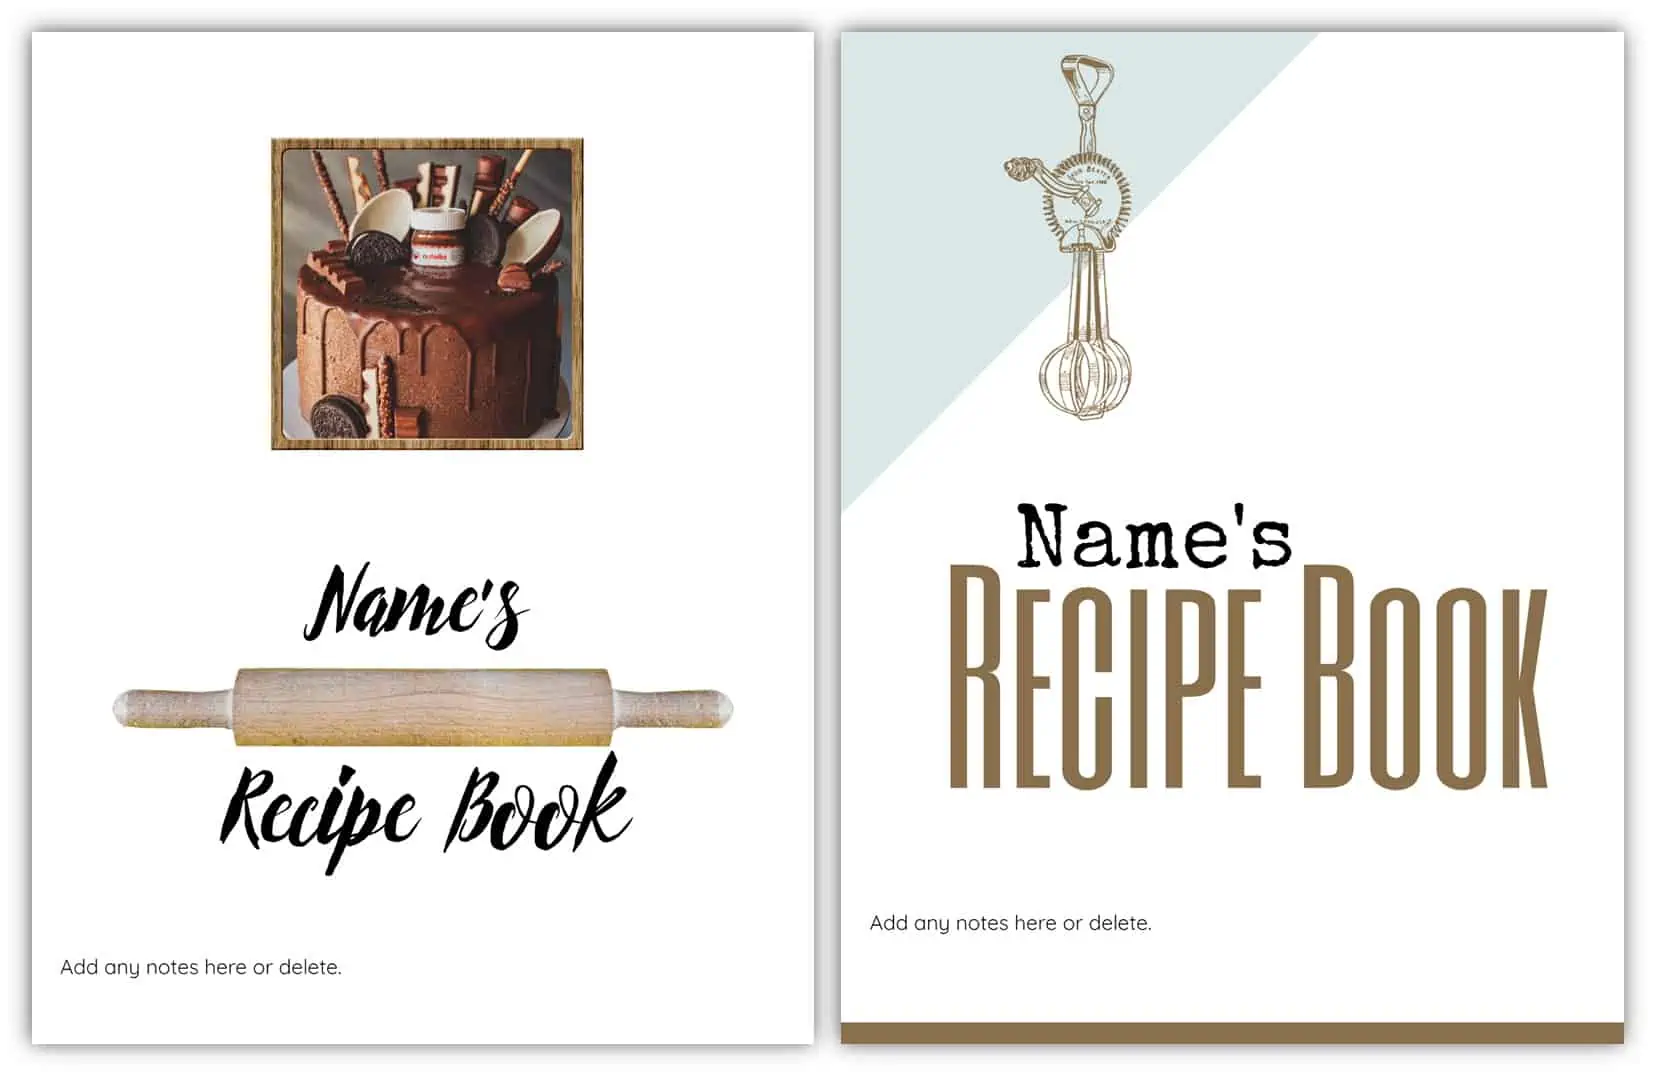 https://www.101planners.com/wp-content/uploads/2021/05/recipe-book-cover.webp